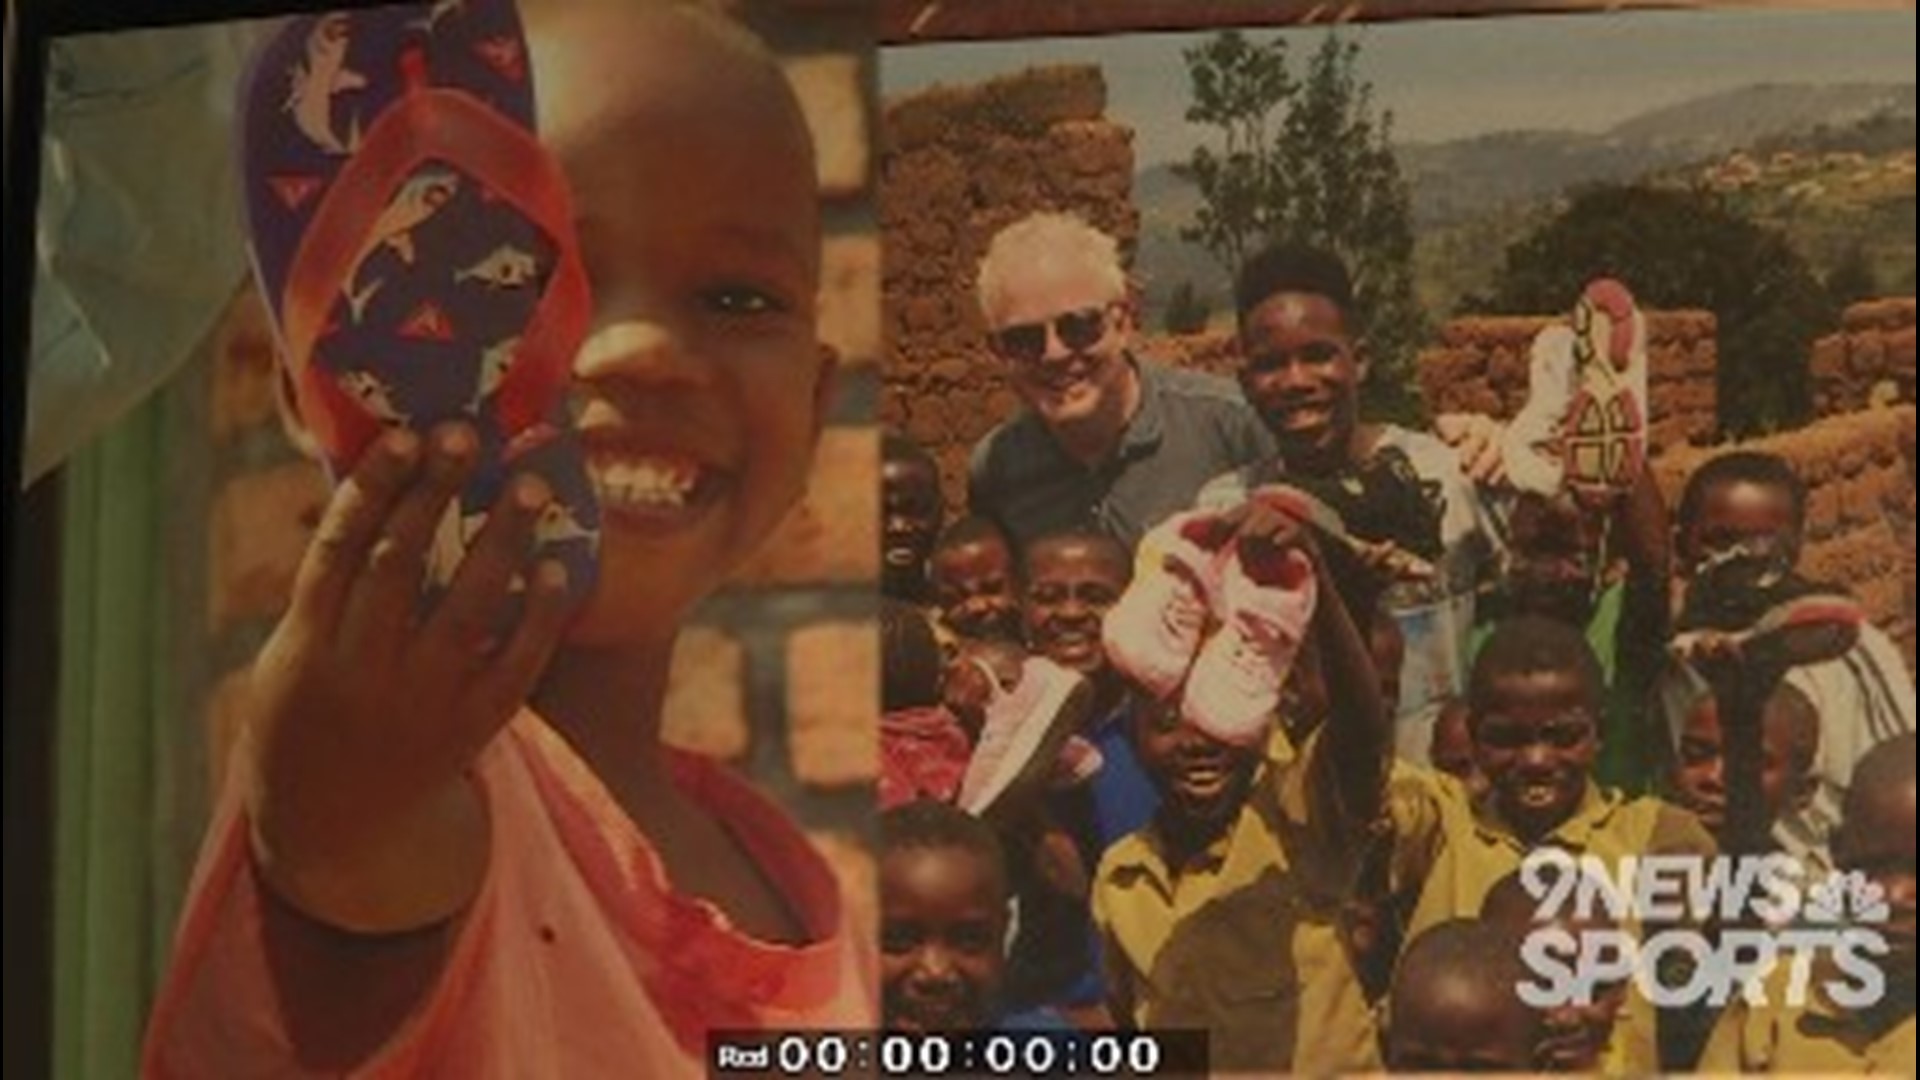 River Lakey and his family have helped many in Rwanda.